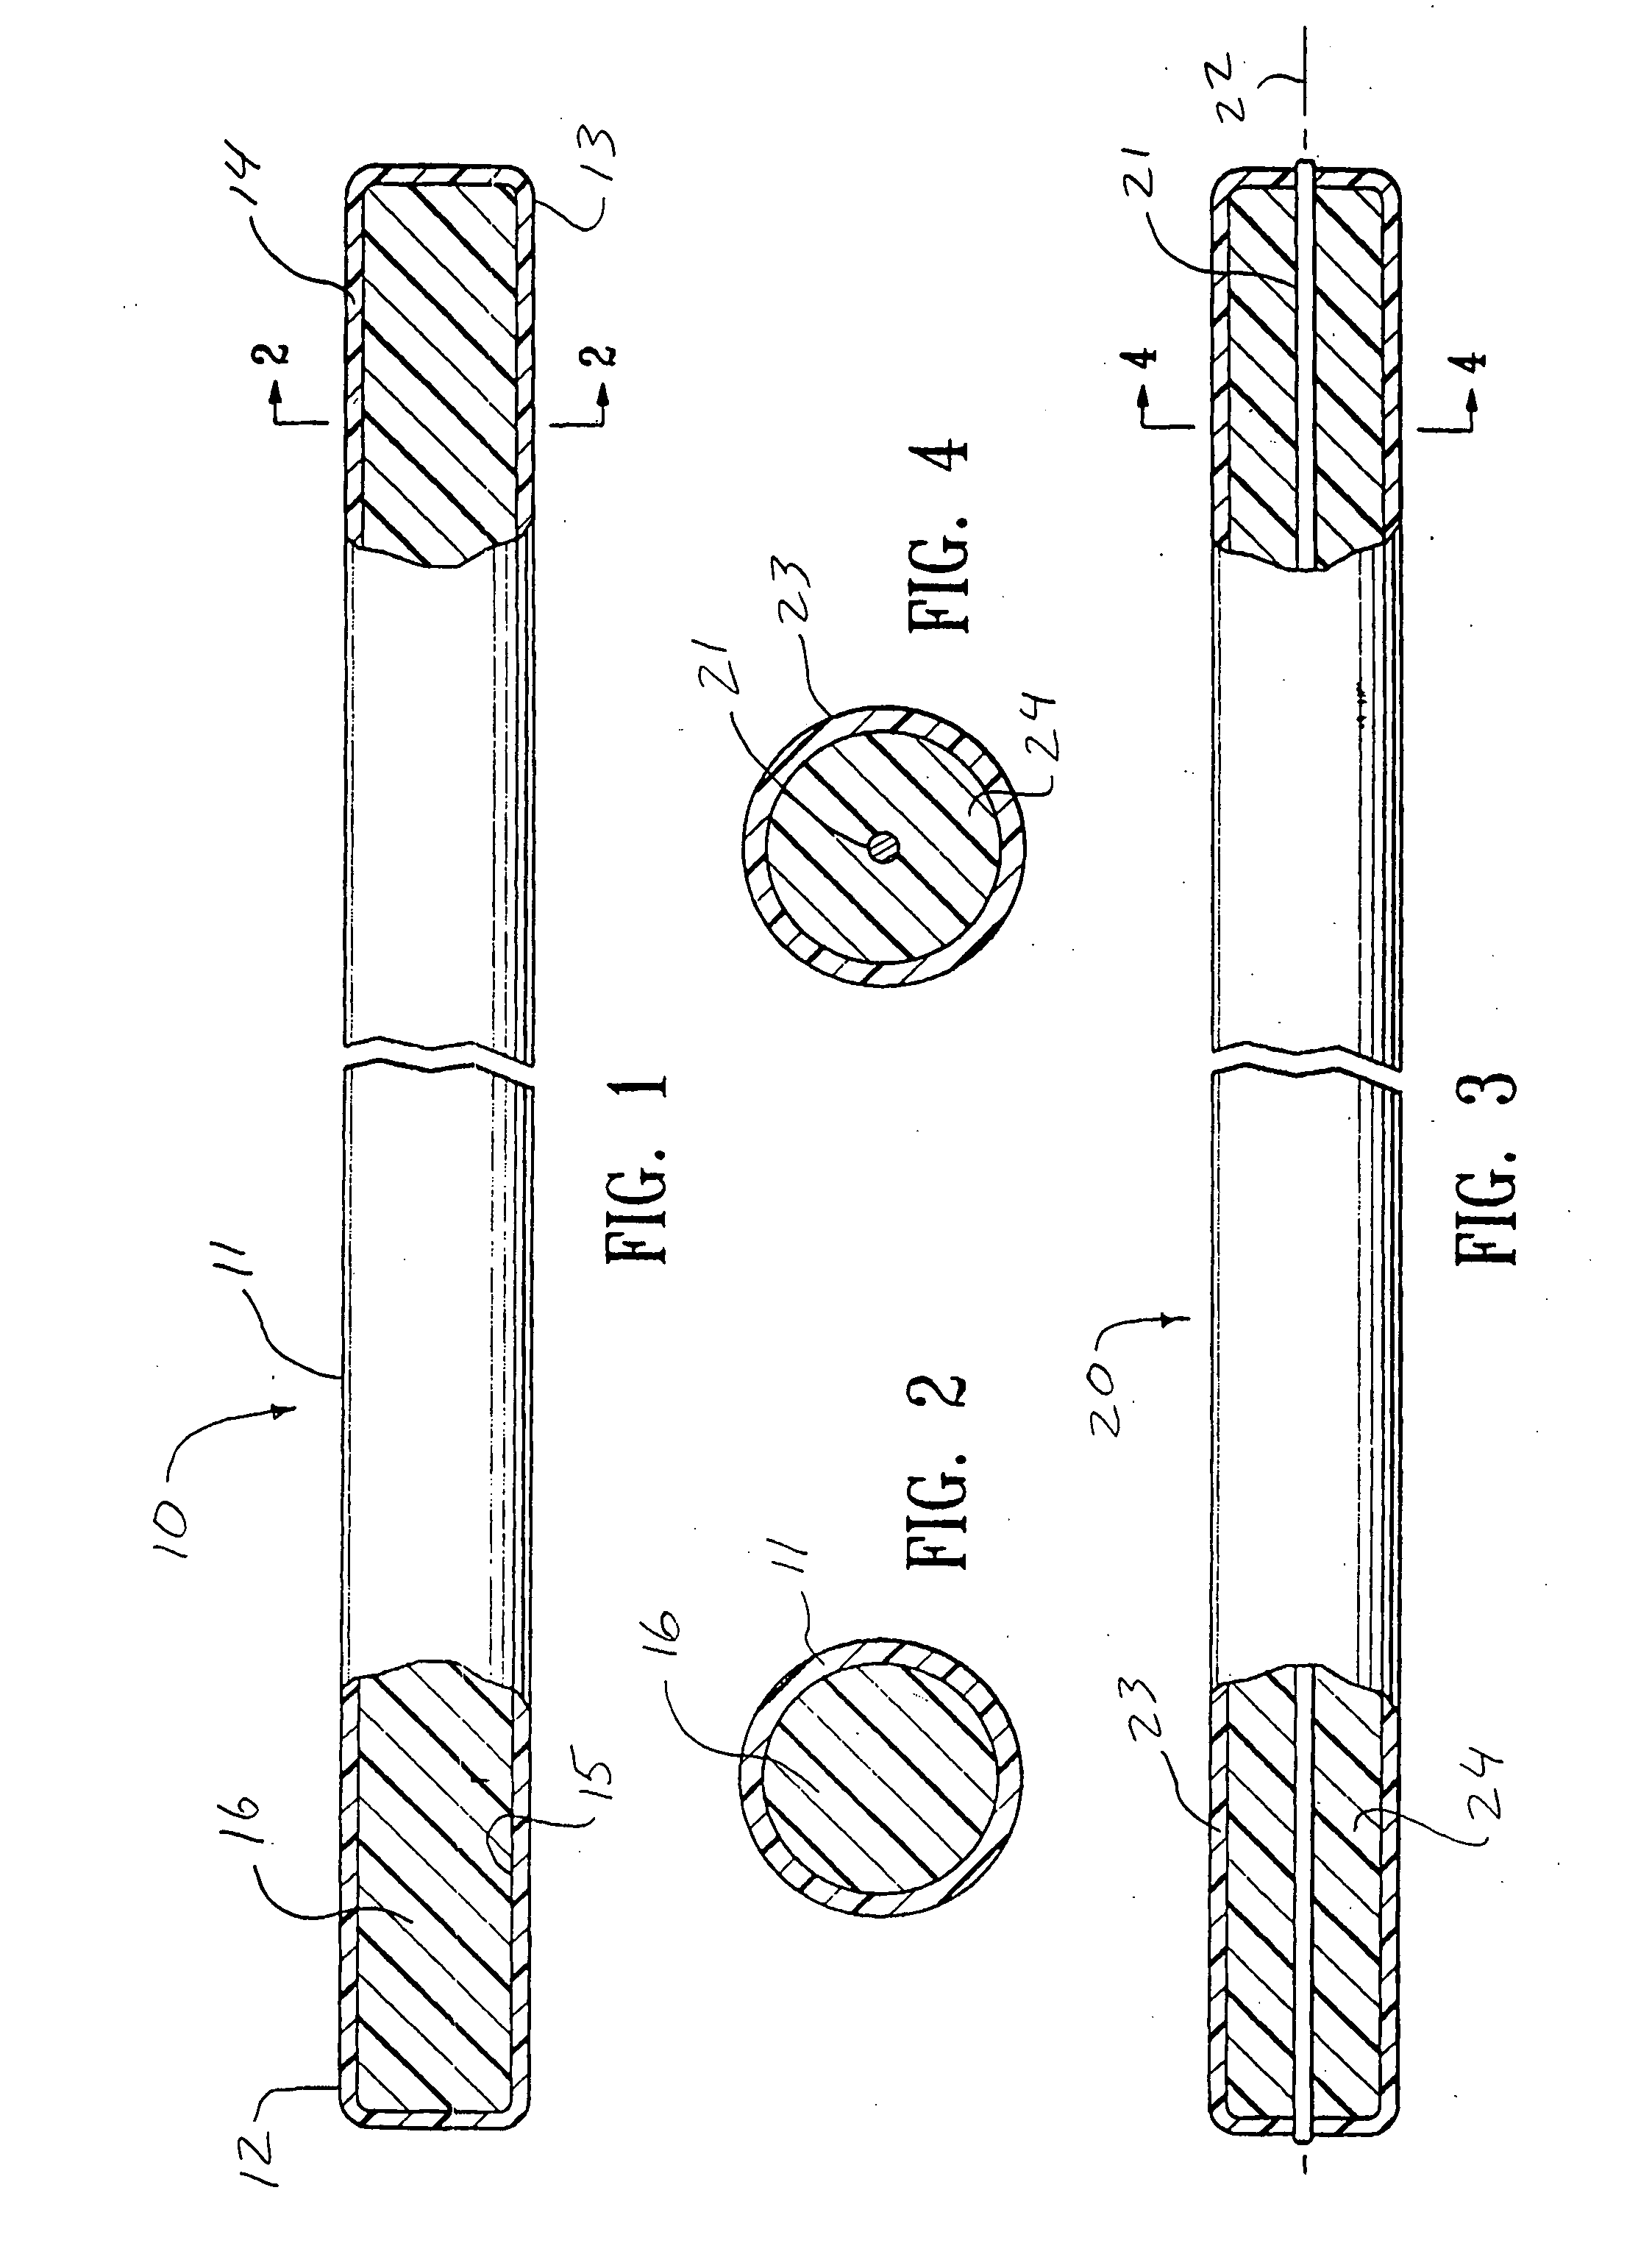 Intracorporeal occlusive device and method